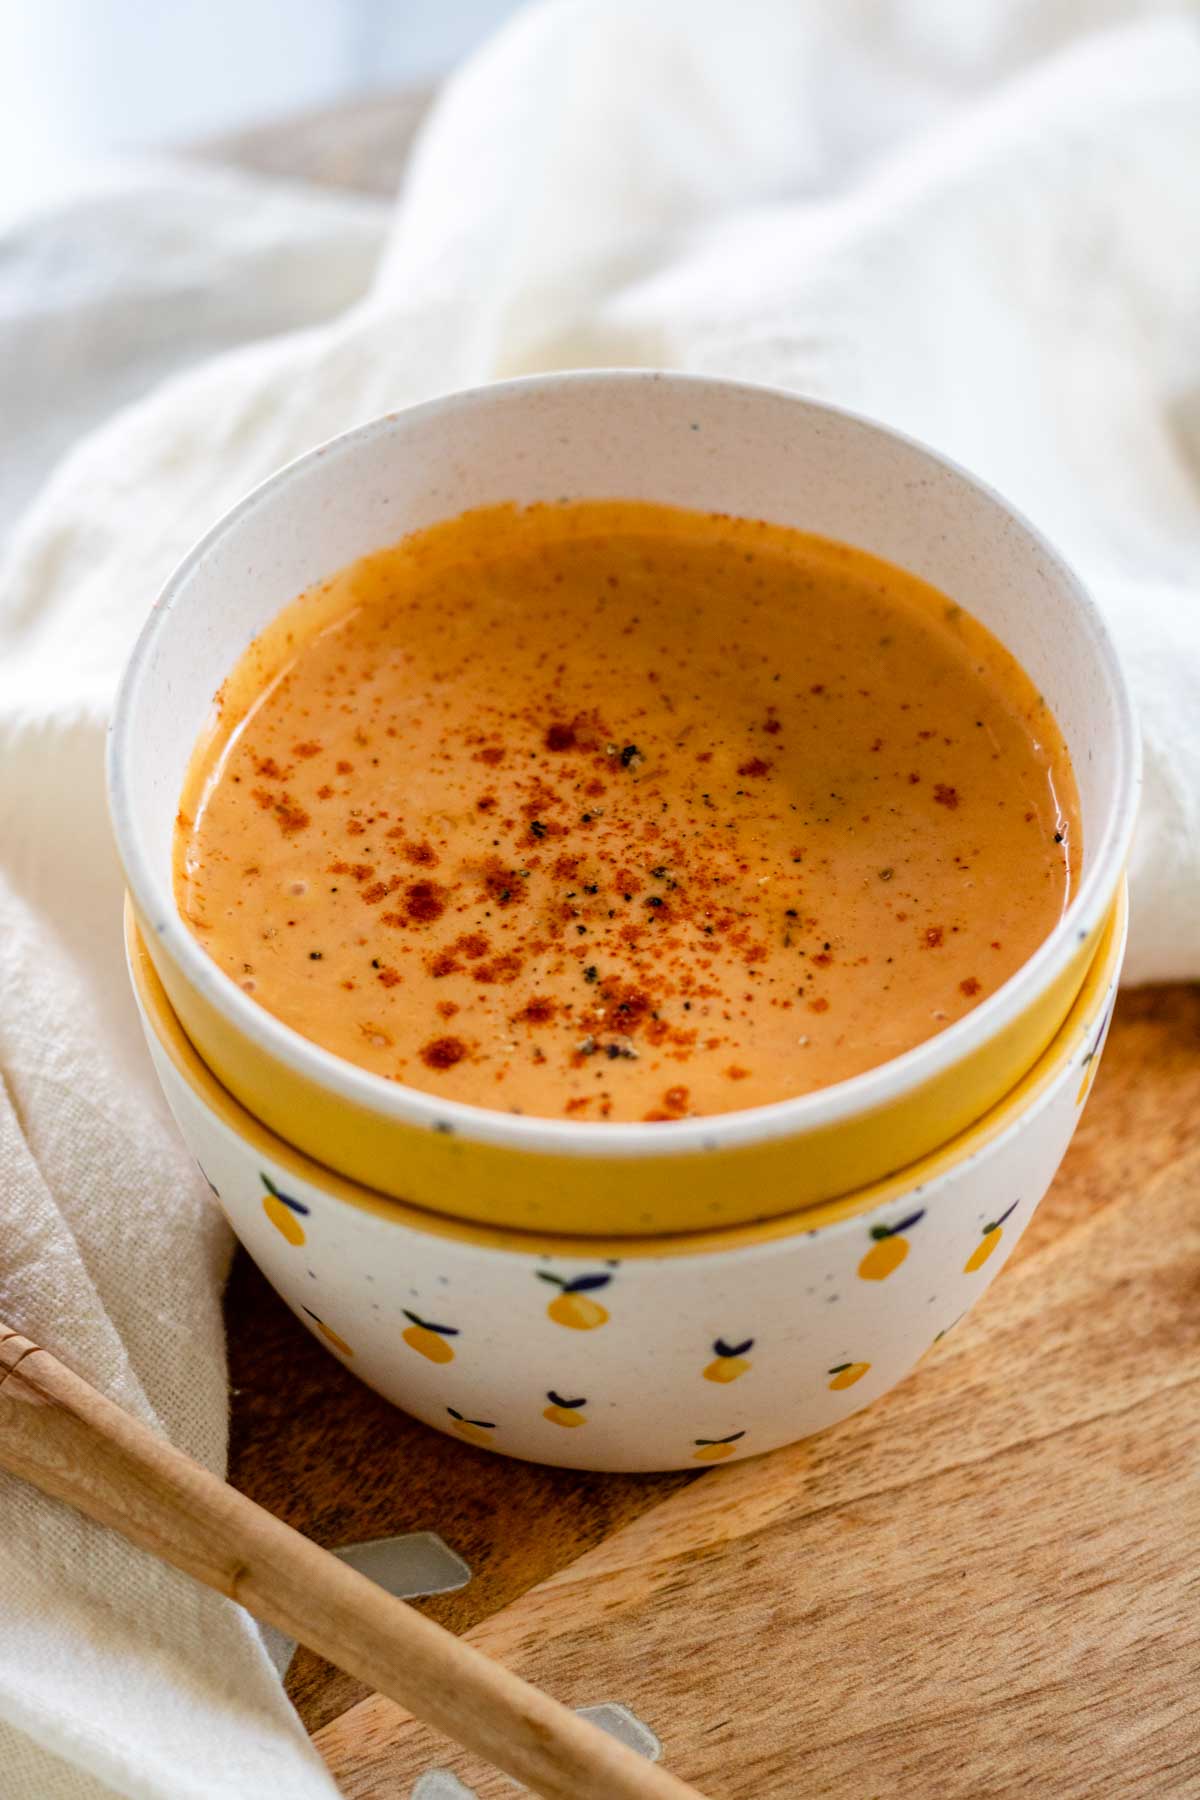 A bowl with an orange sauce and paprika sprinkled on top.